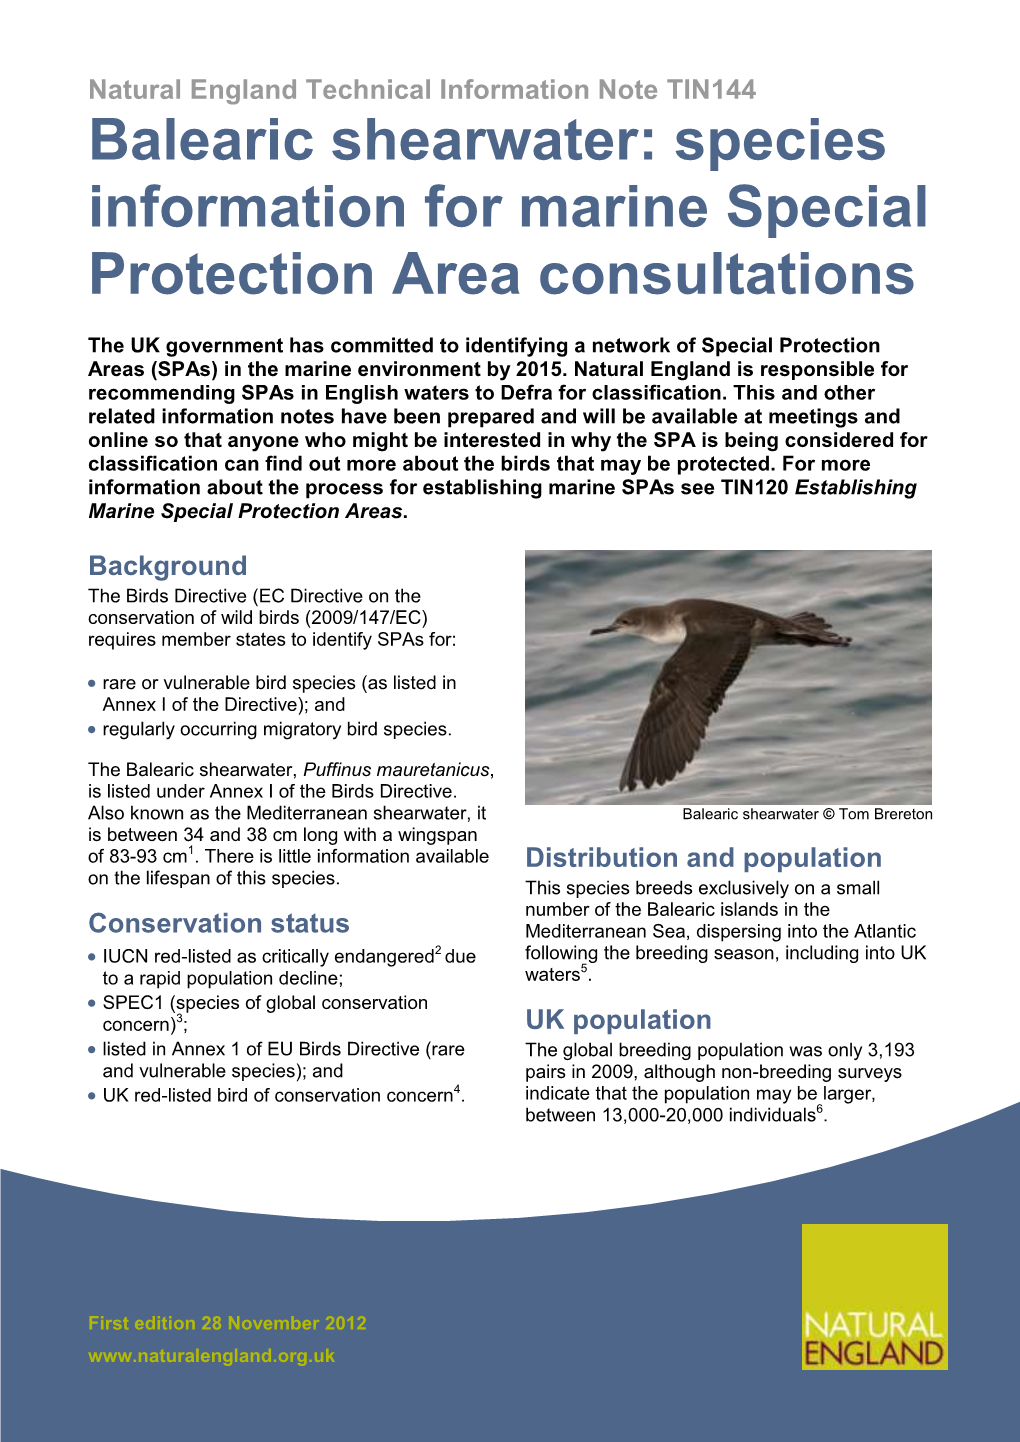 Balearic Shearwater: Species Information for Marine Special Protection Area Consultations